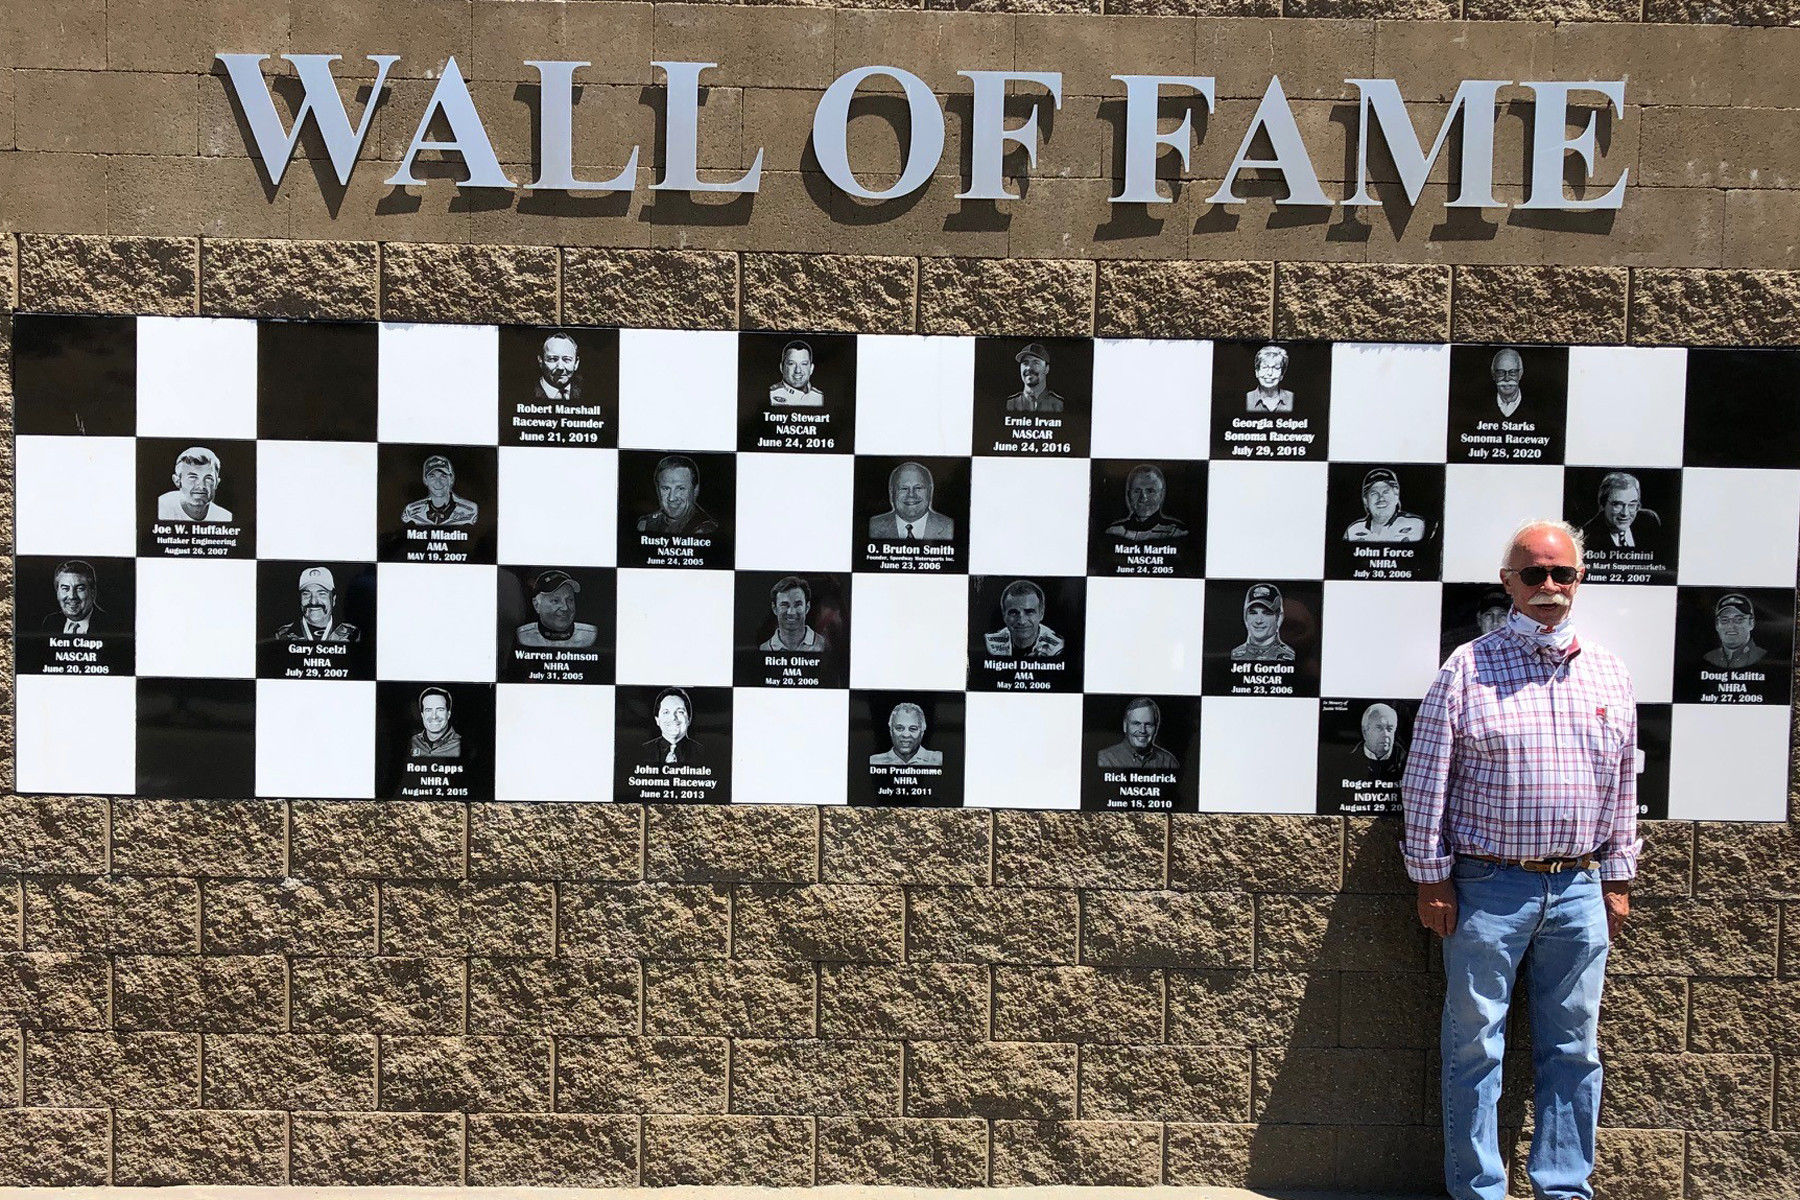 Jere Starks in front of the Wall of Fame at Sonoma Raceway. Photo courtesy Sonoma Raceway.